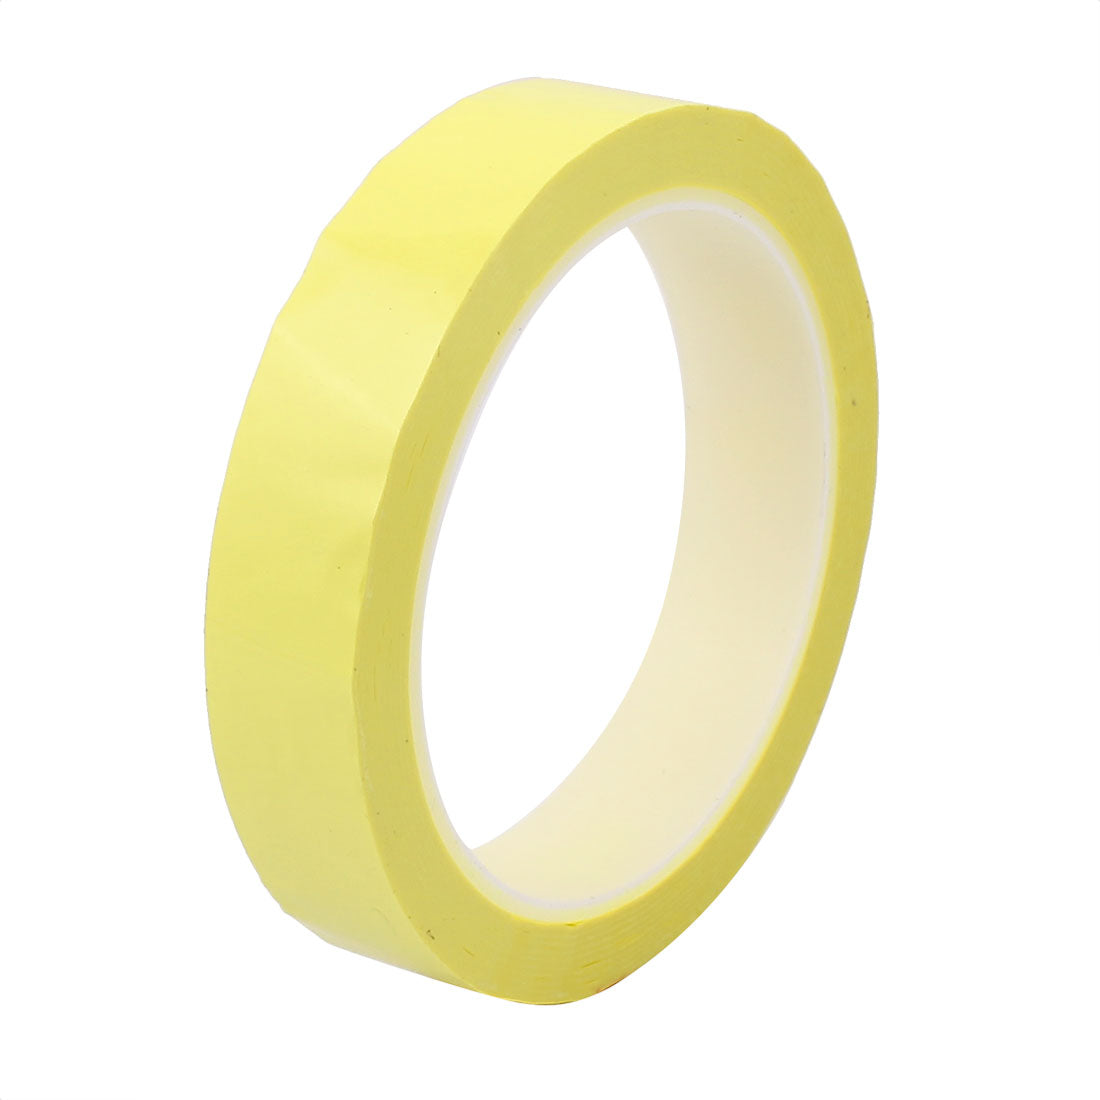 uxcell Uxcell 1Pcs 20mm Single Sided Strong Self Adhesive Mylar Tape 50M Length Yellow